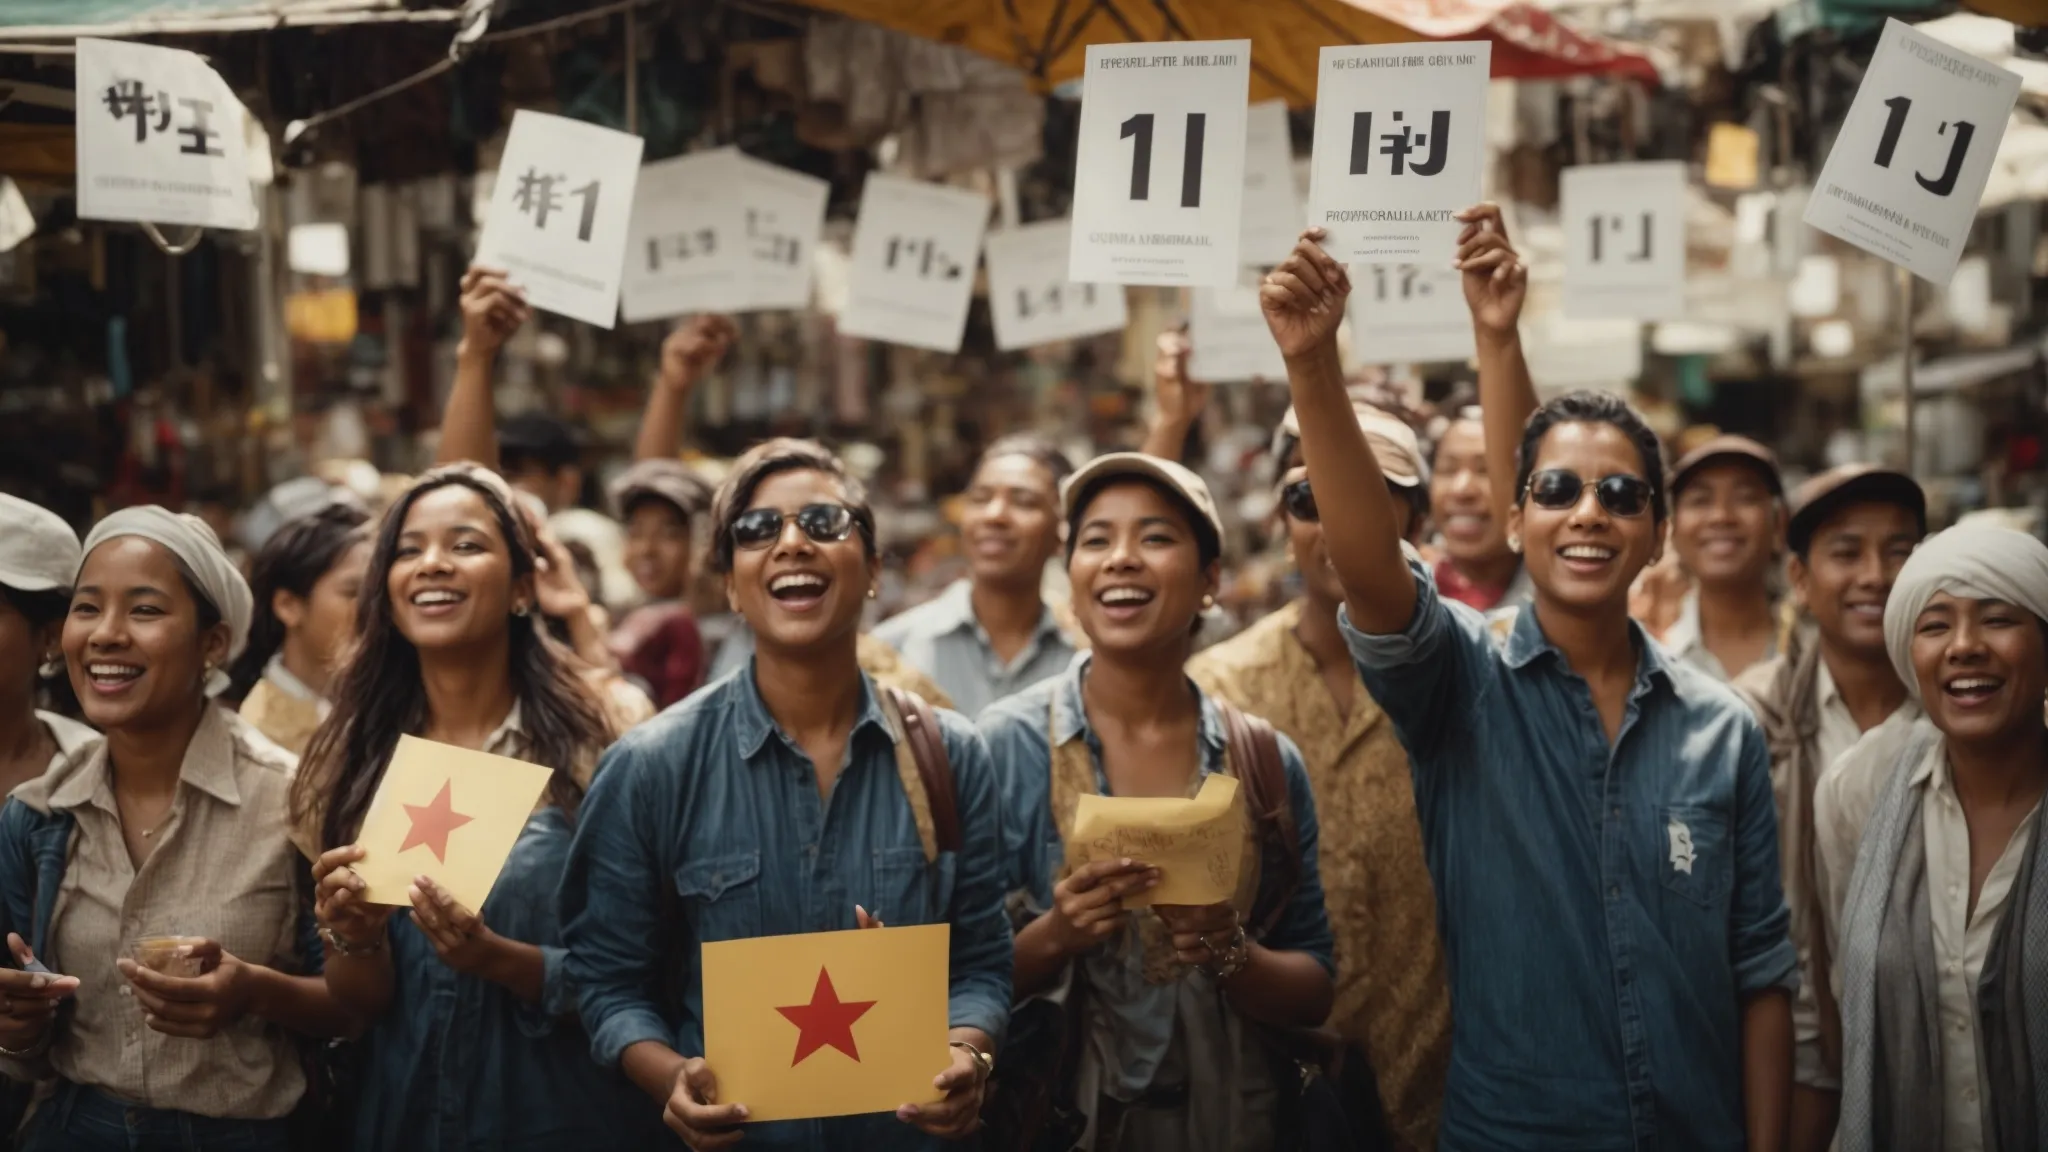 a group of content people holding five-star rating signs above their heads in a bright, bustling market.